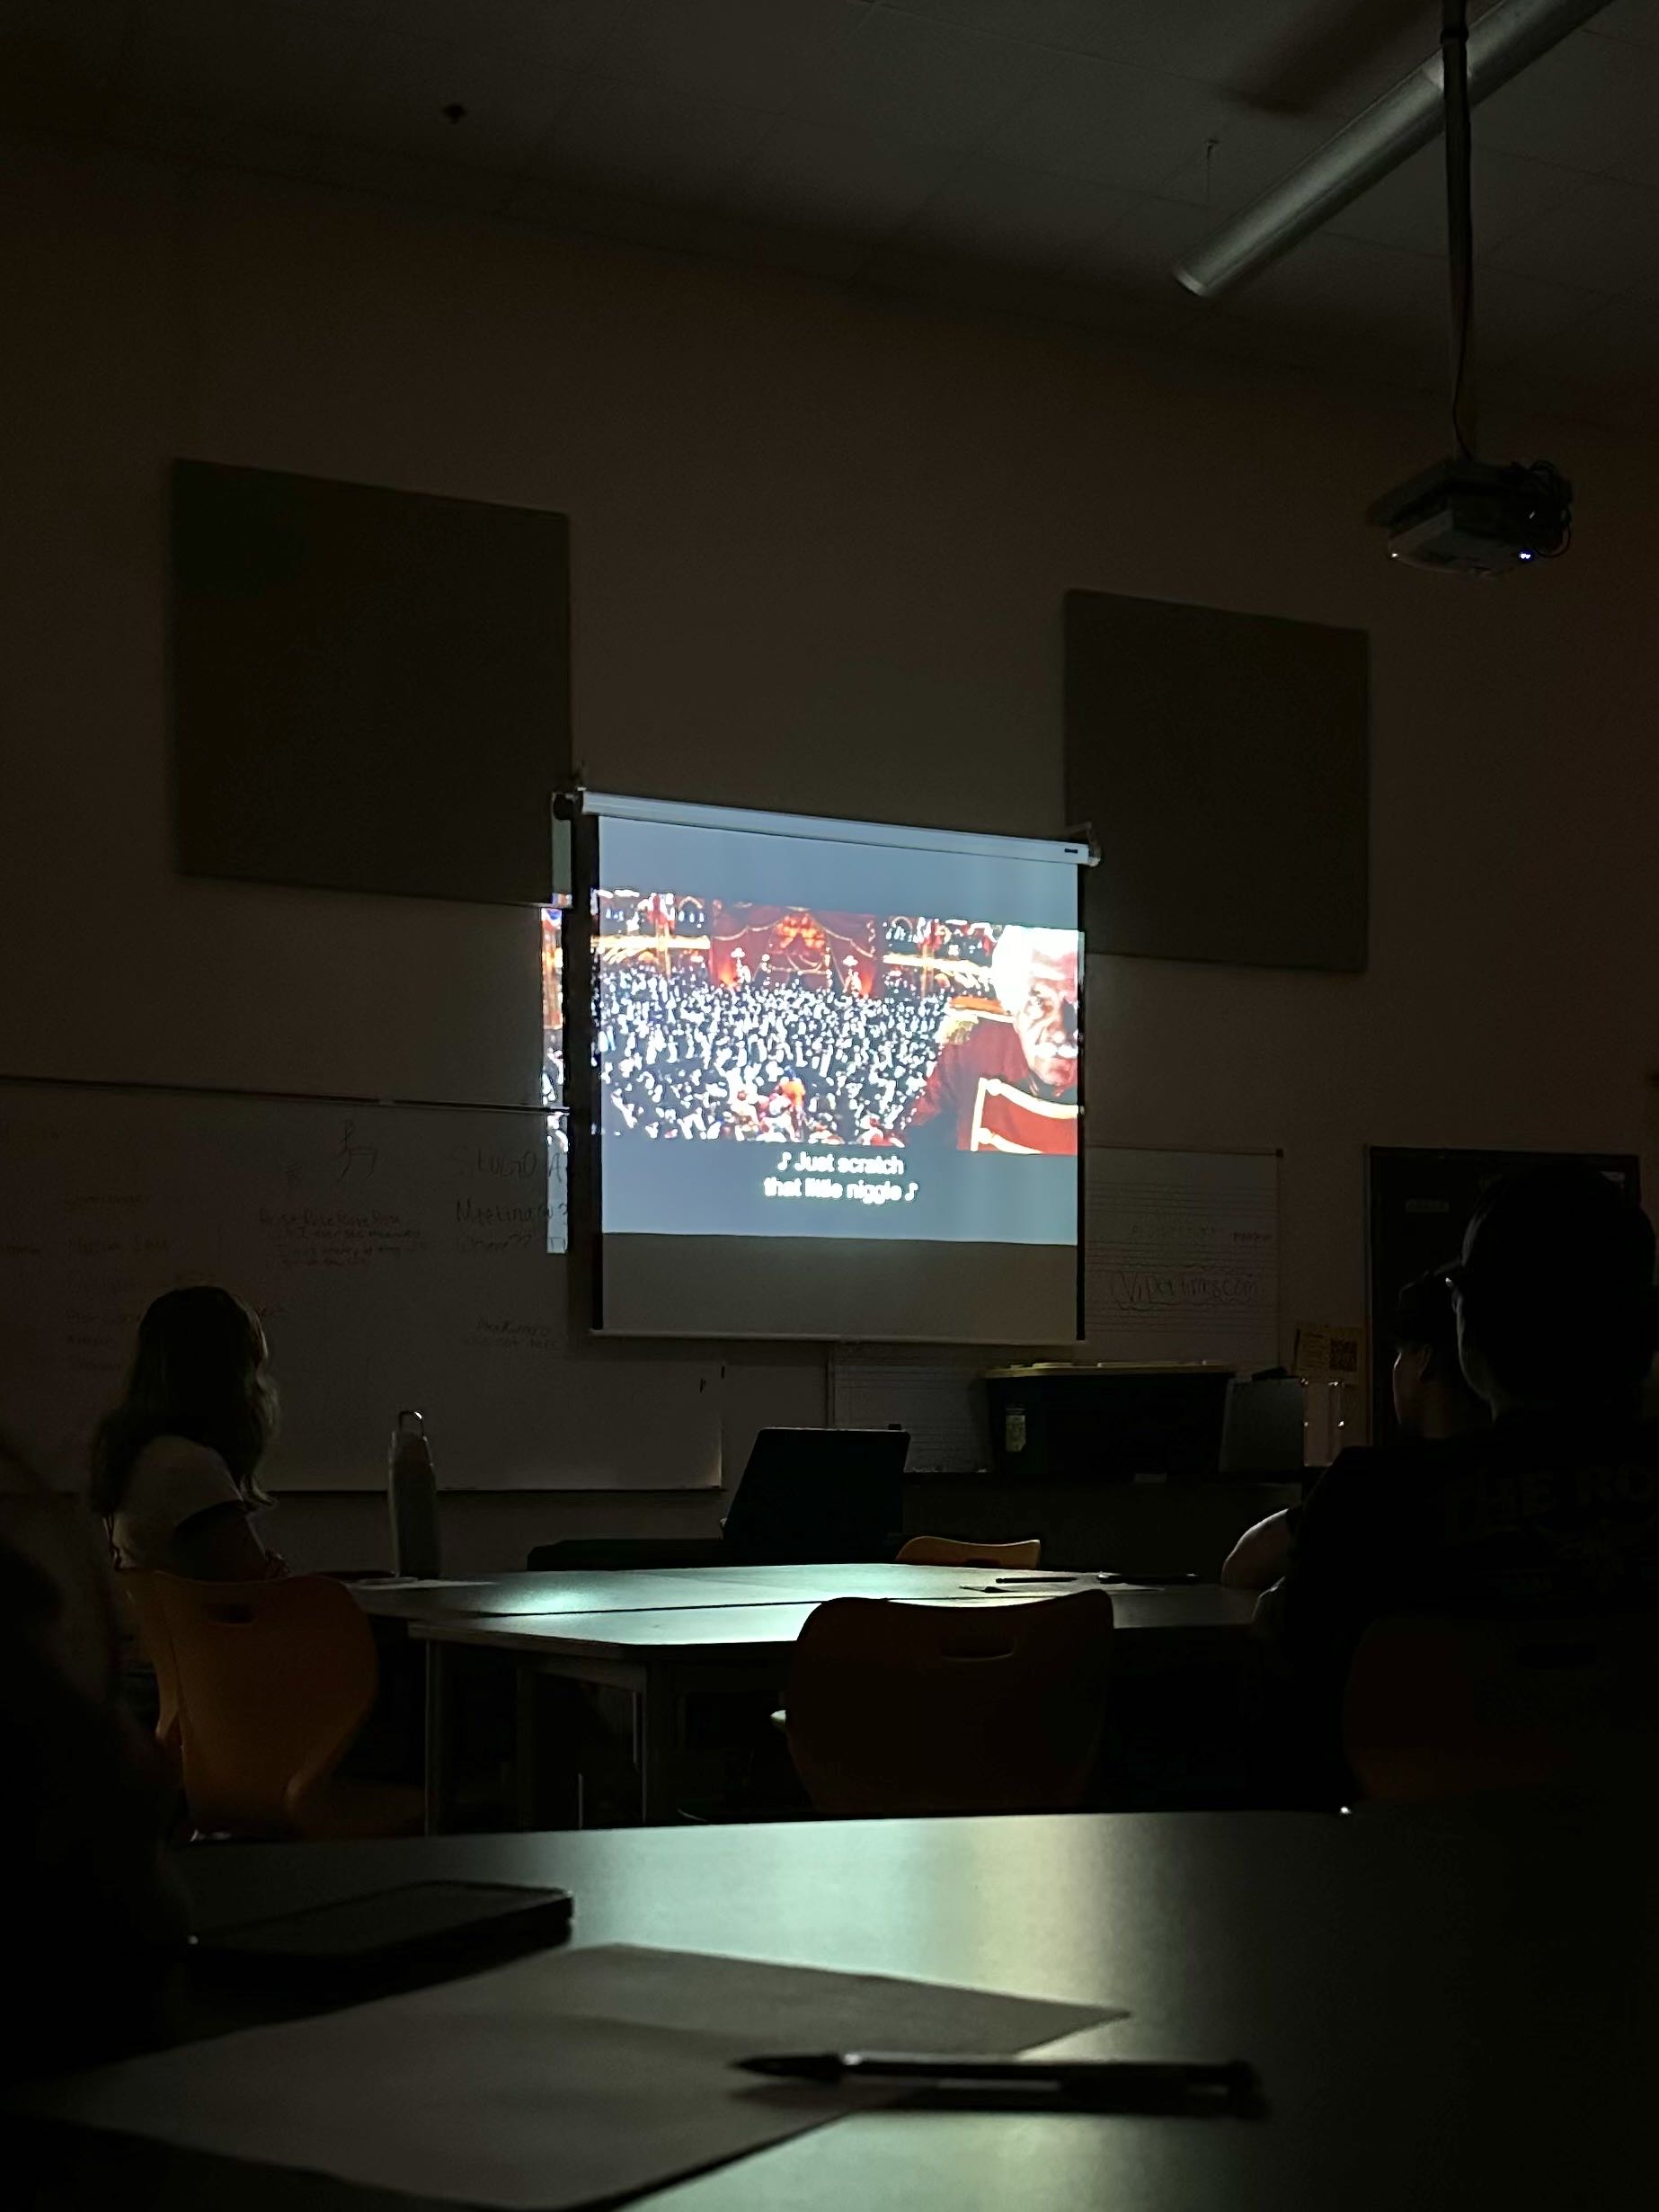 Film and Media Studies class watching Moulin Rouge in the classroom